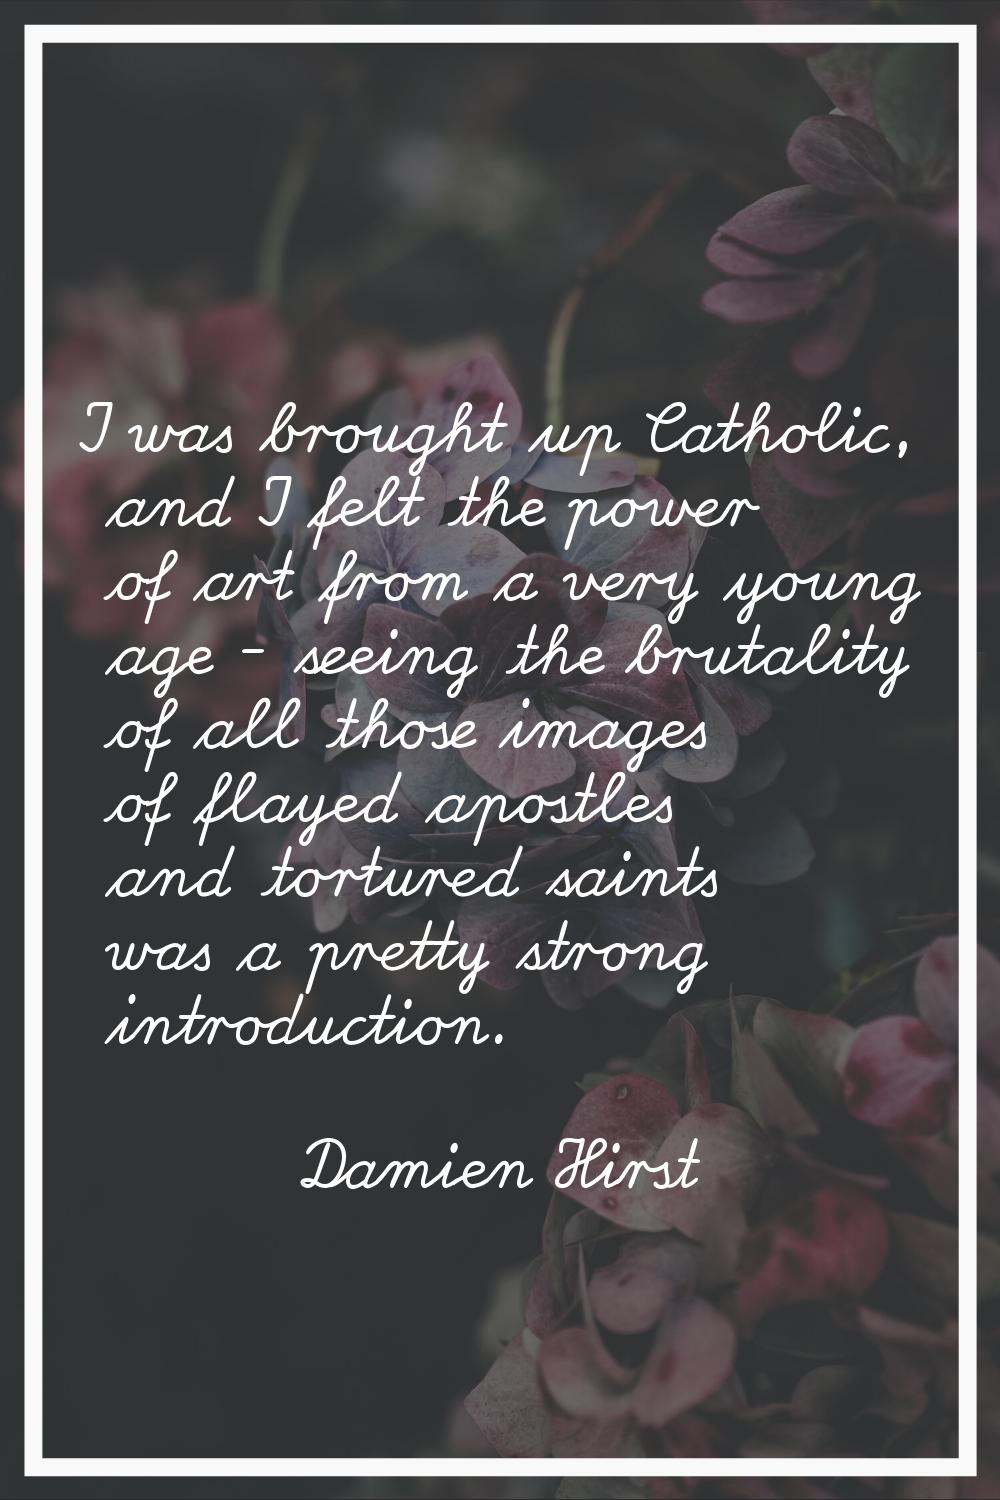 I was brought up Catholic, and I felt the power of art from a very young age - seeing the brutality